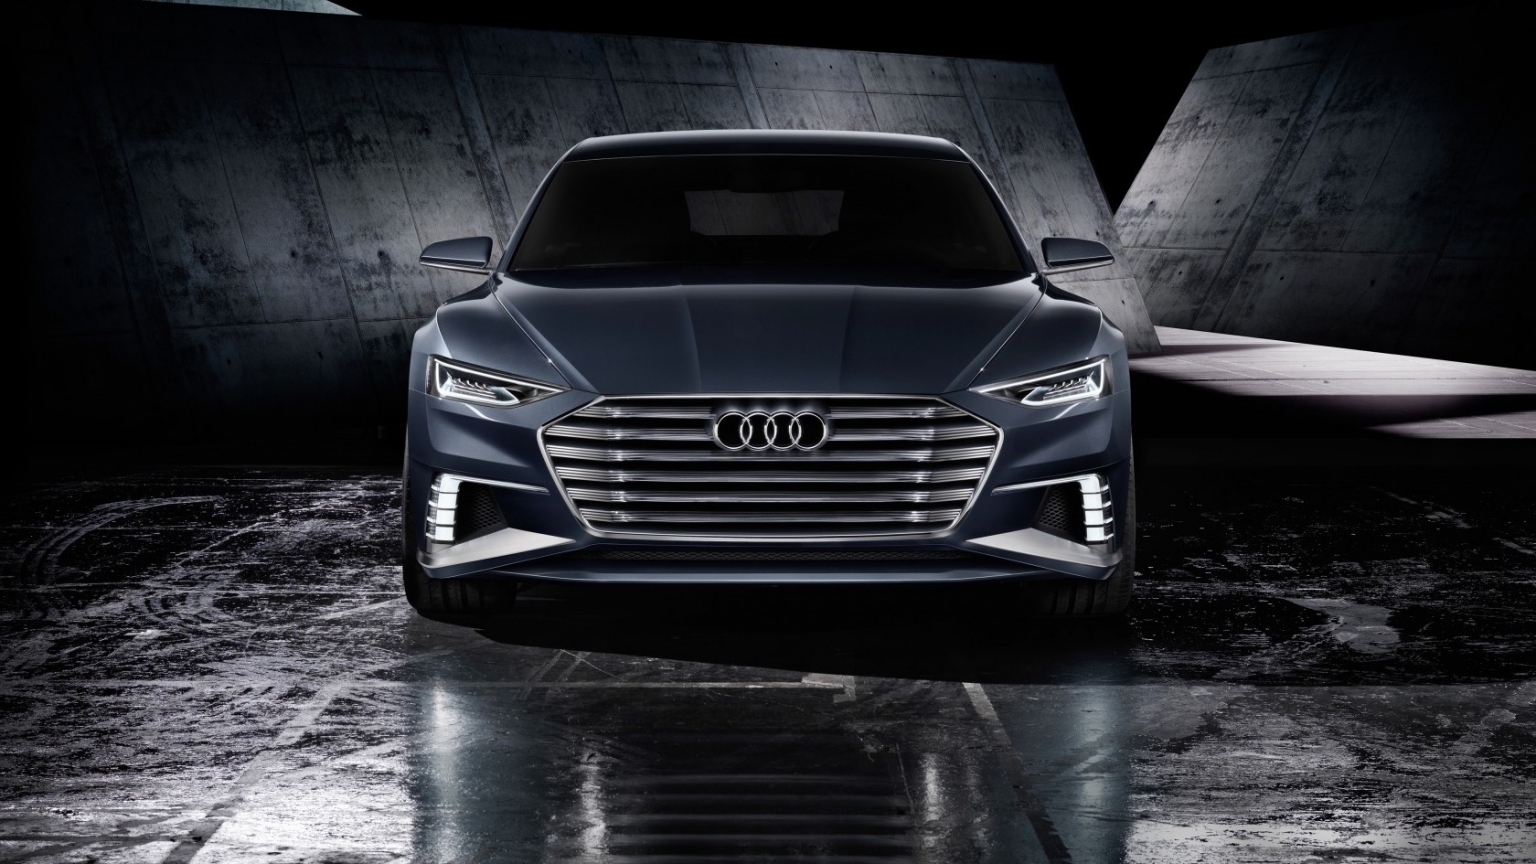 Audi Prologue Avant Front View for 1536 x 864 HDTV resolution